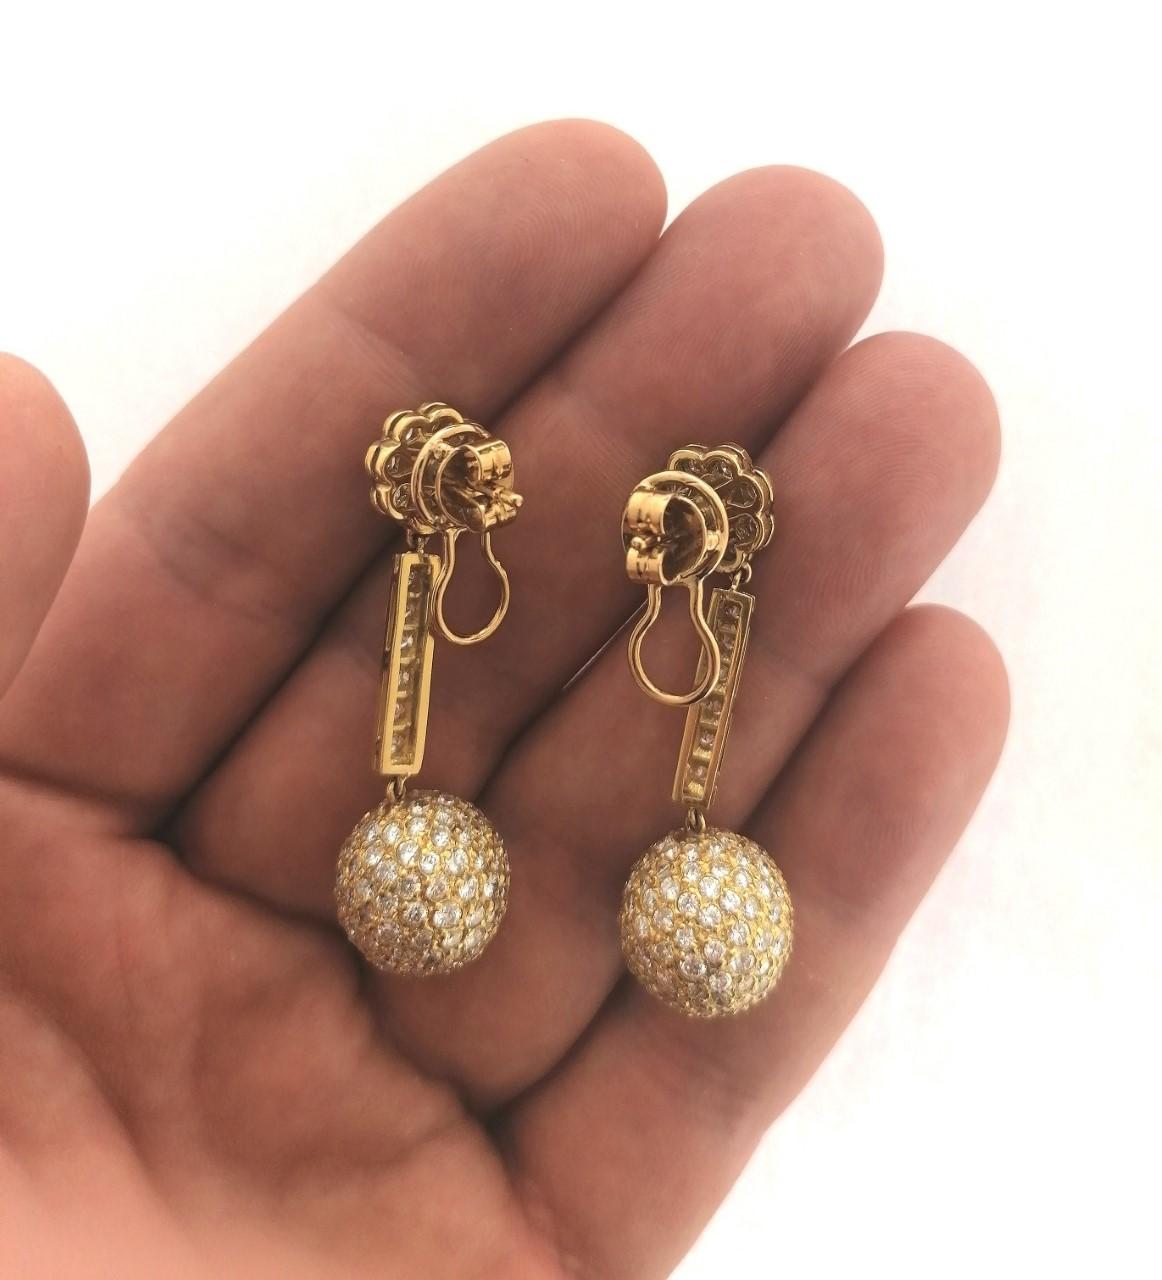 Original and colorful 18 karat yellow gold earrings with brilliants cut diamonds. They have three parts:
-A flower on the top, a bar in the middle and a ball down. All of them have movement. This earrings have a very secure closure that avoid the